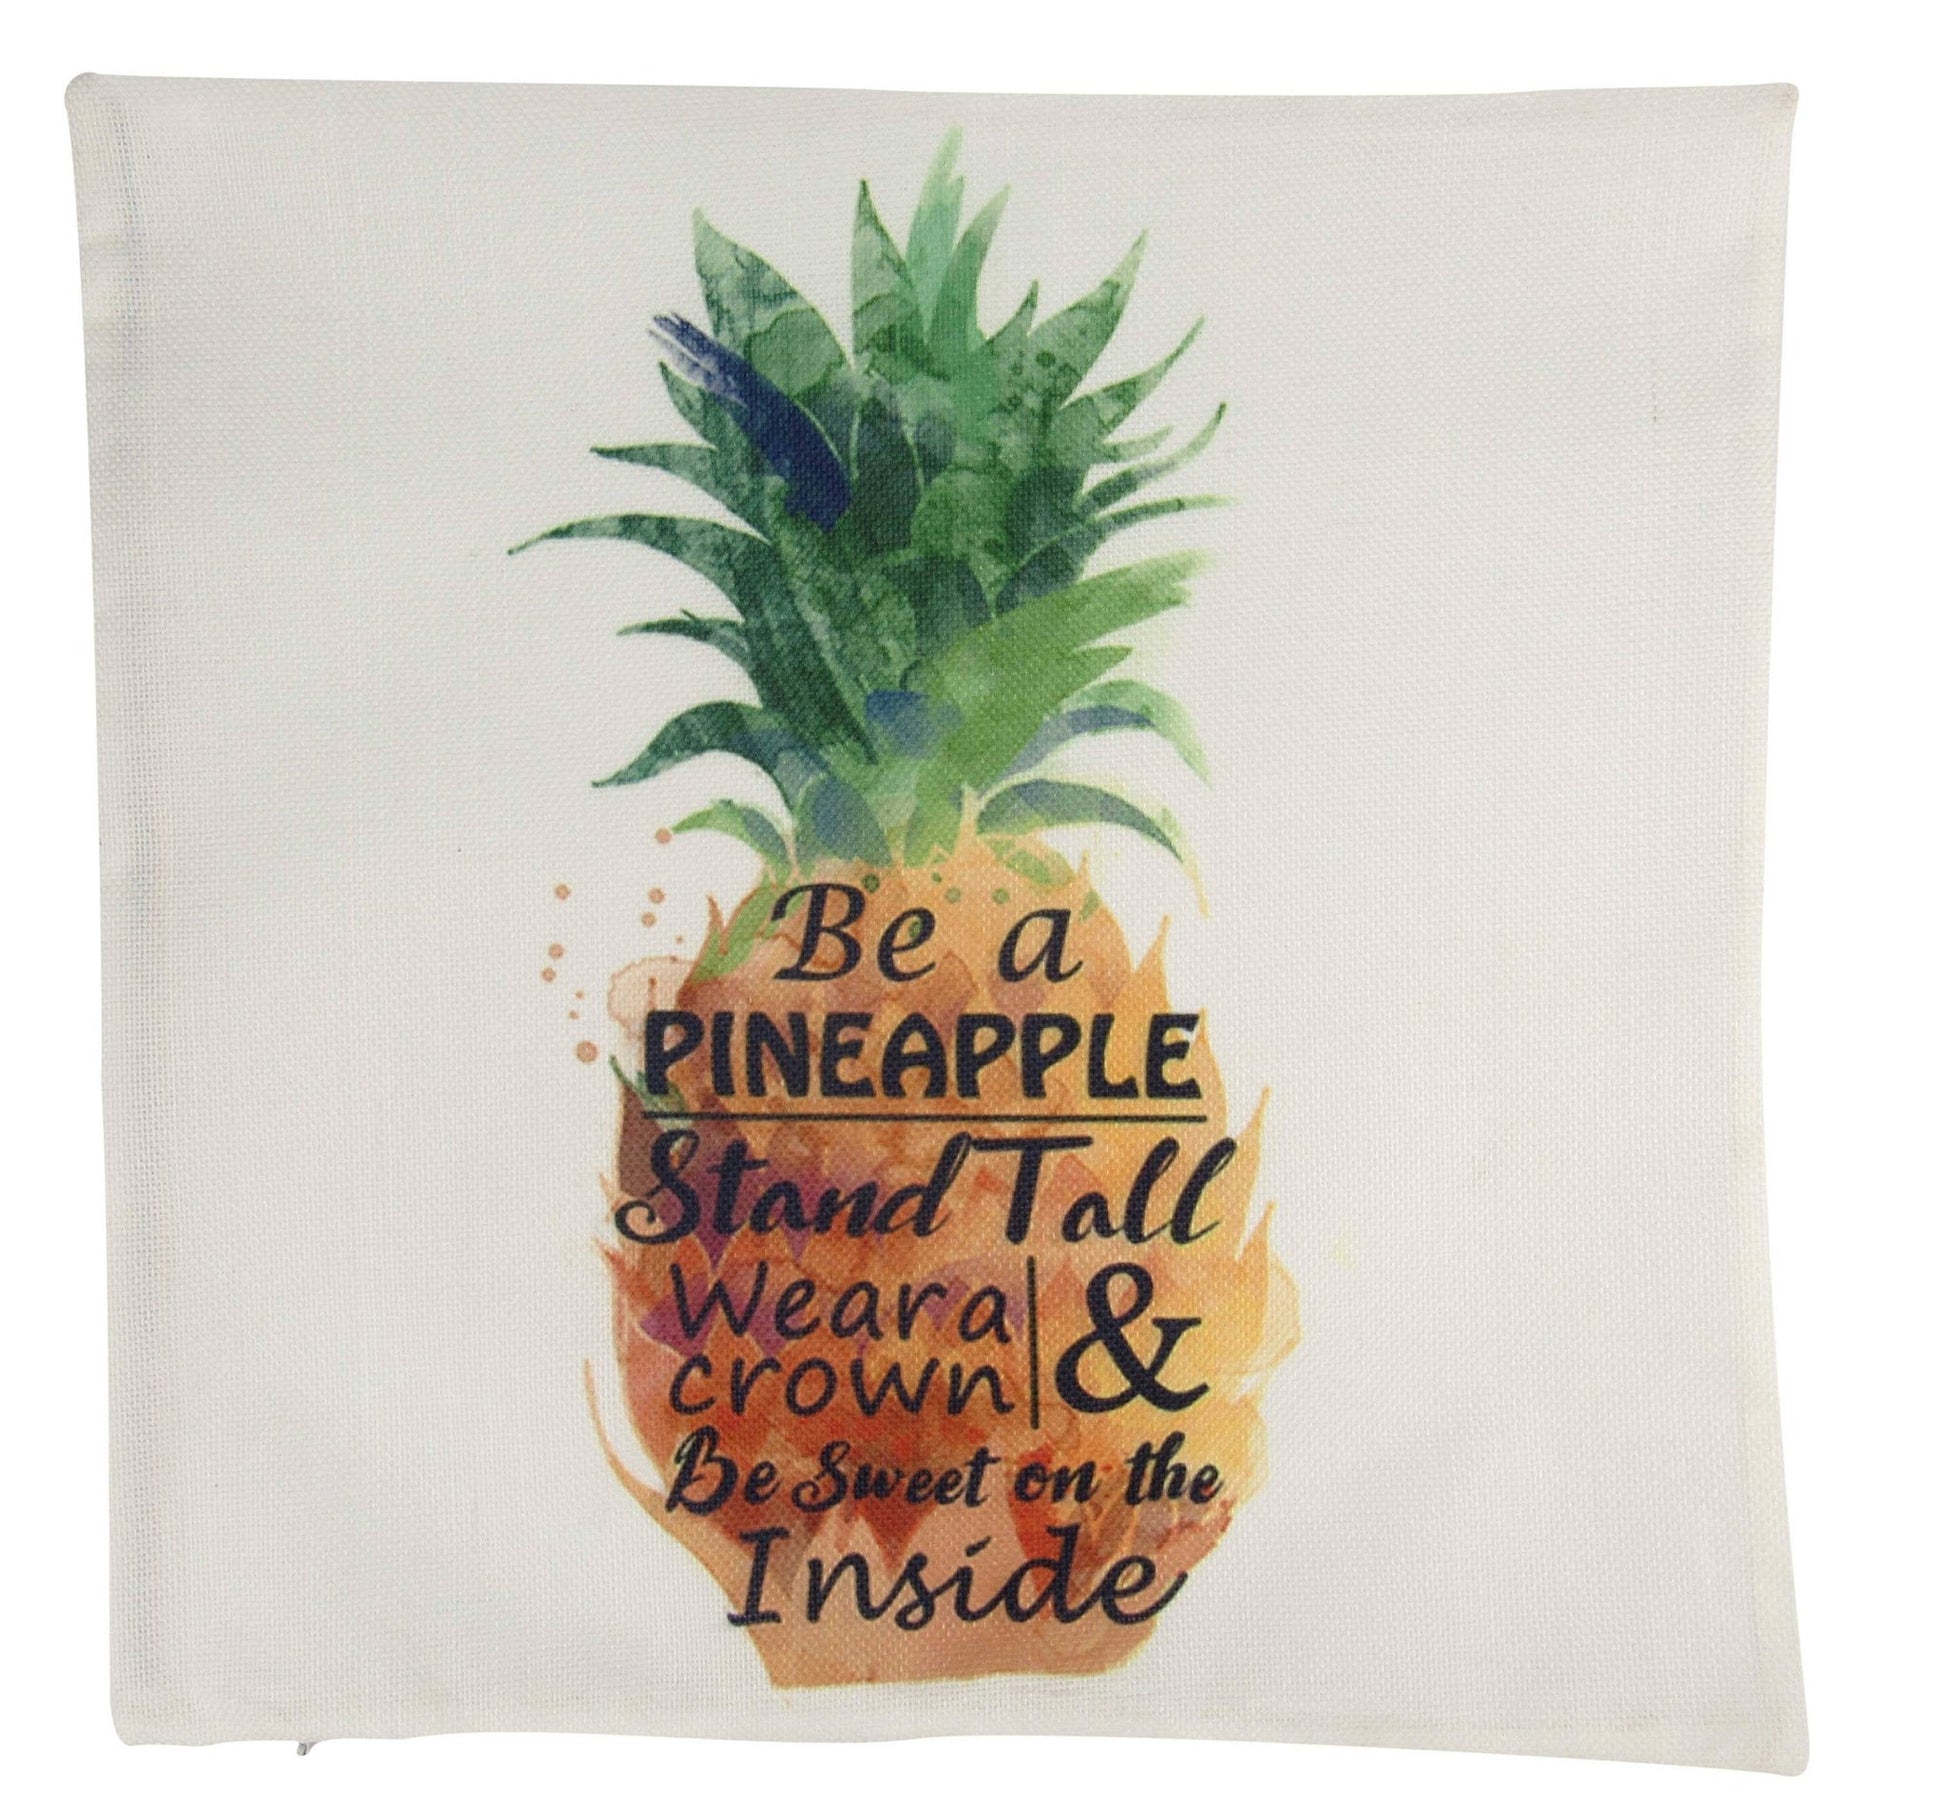 Be a Pineapple | Pillow Cover | Pineapple Gifts | Pineapple | - Shell Yeah by Jaks18x18 InchesCover & Insertbeapineapple-9Home Decor